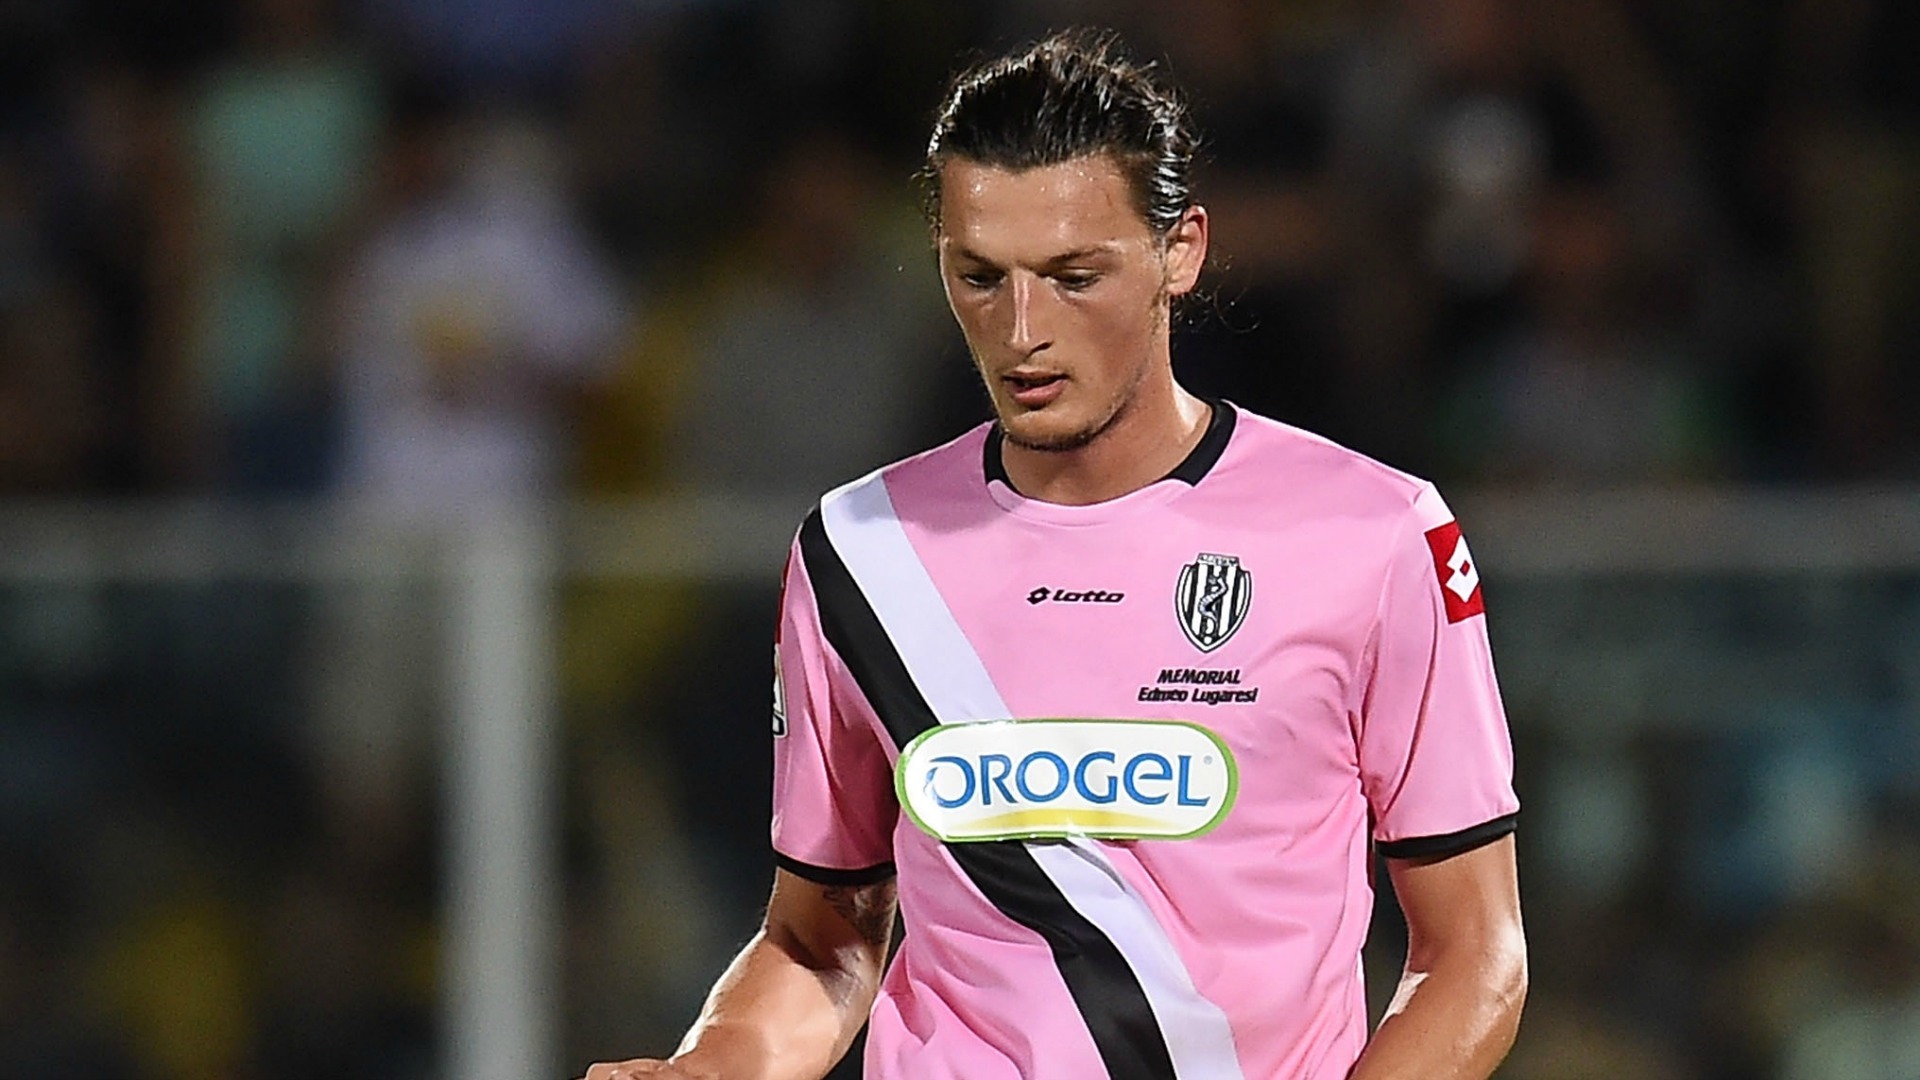 Milan Djuric was reportedly subject of a £720,000 bid from Celtic